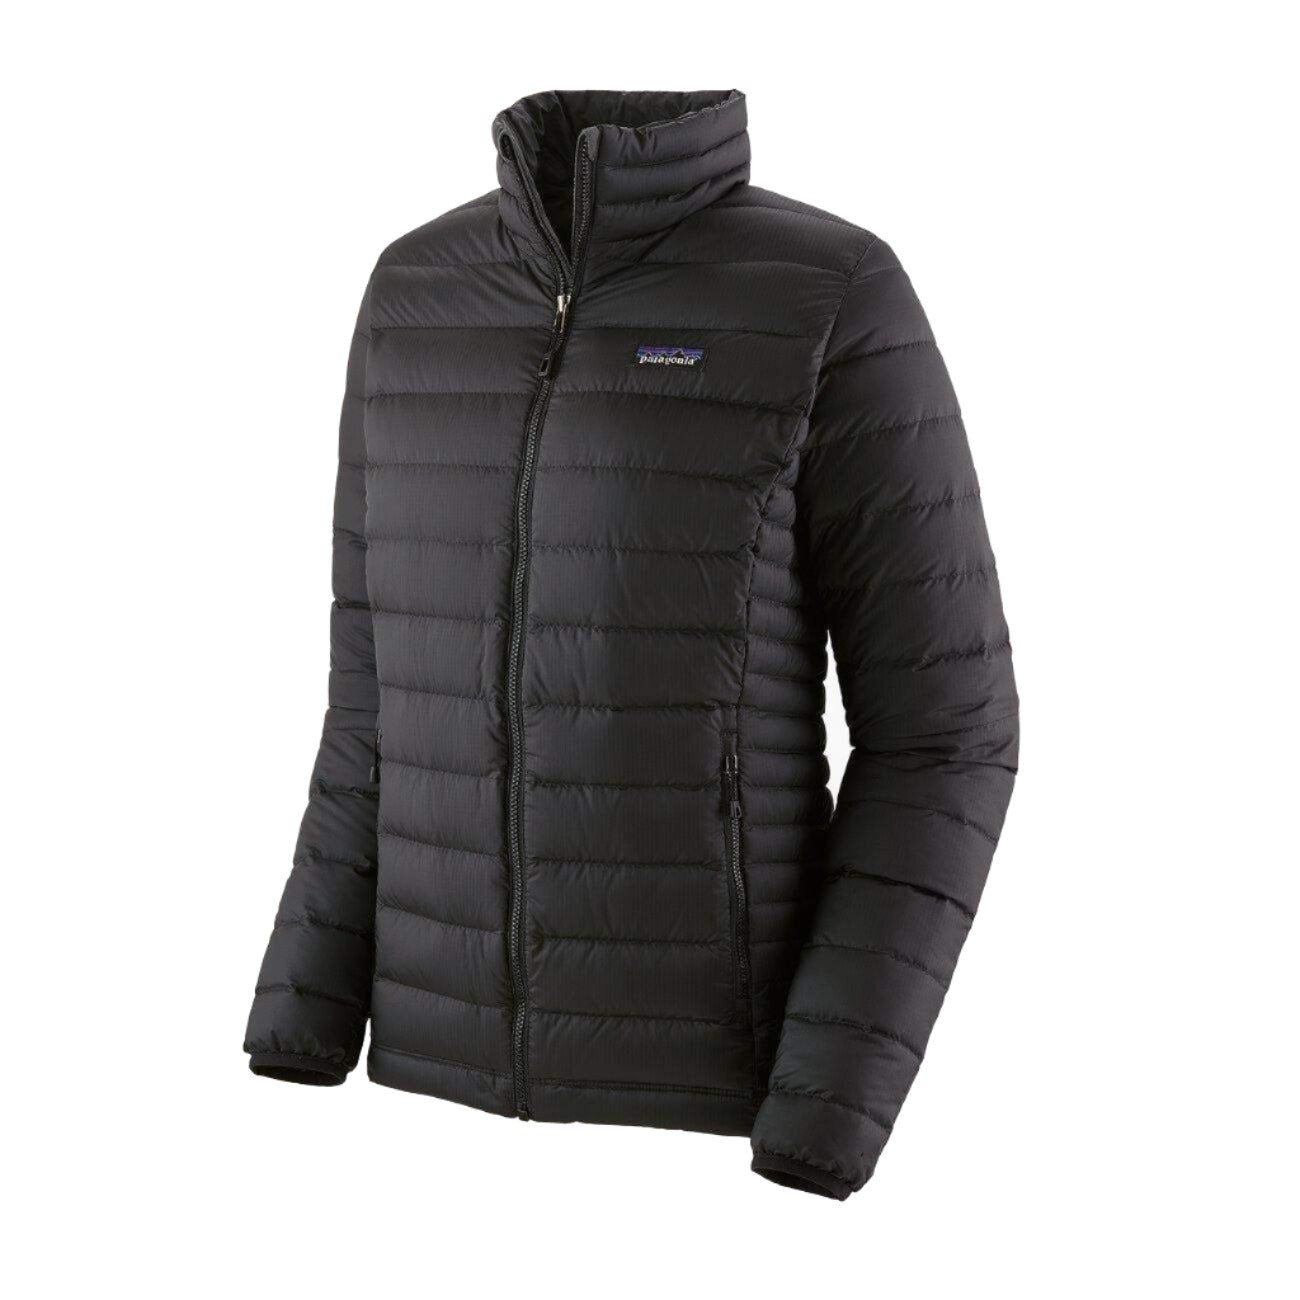 Patagonia Women's Down Sweater Jacket - The Luxury Promotional Gifts Company Limited